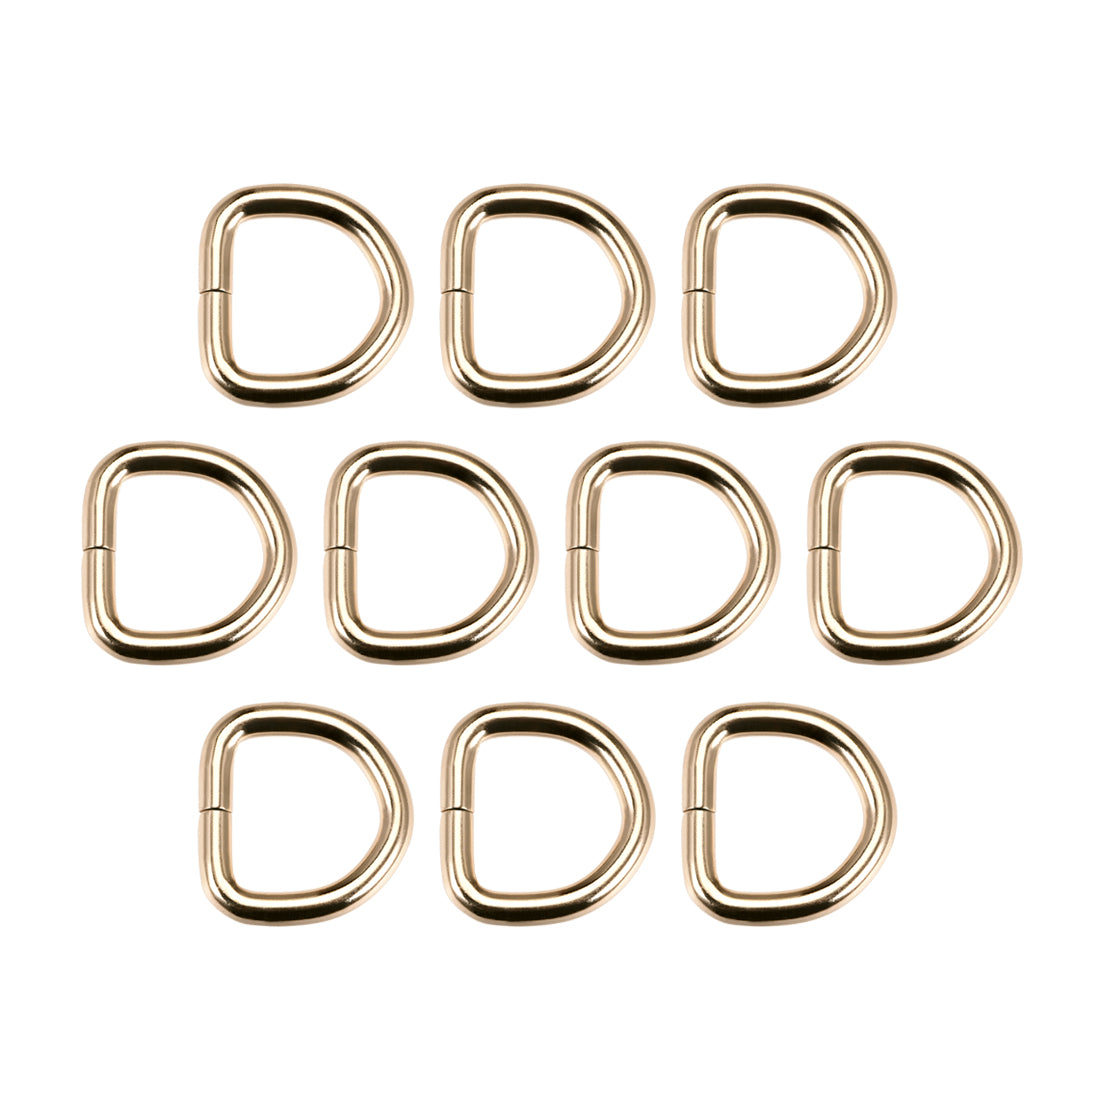 uxcell Uxcell 10 Pcs D Ring Buckle 0.8 Inch Metal Semi-Circular D-Rings Gold Tone for Hardware Bags Belts Craft DIY Accessories